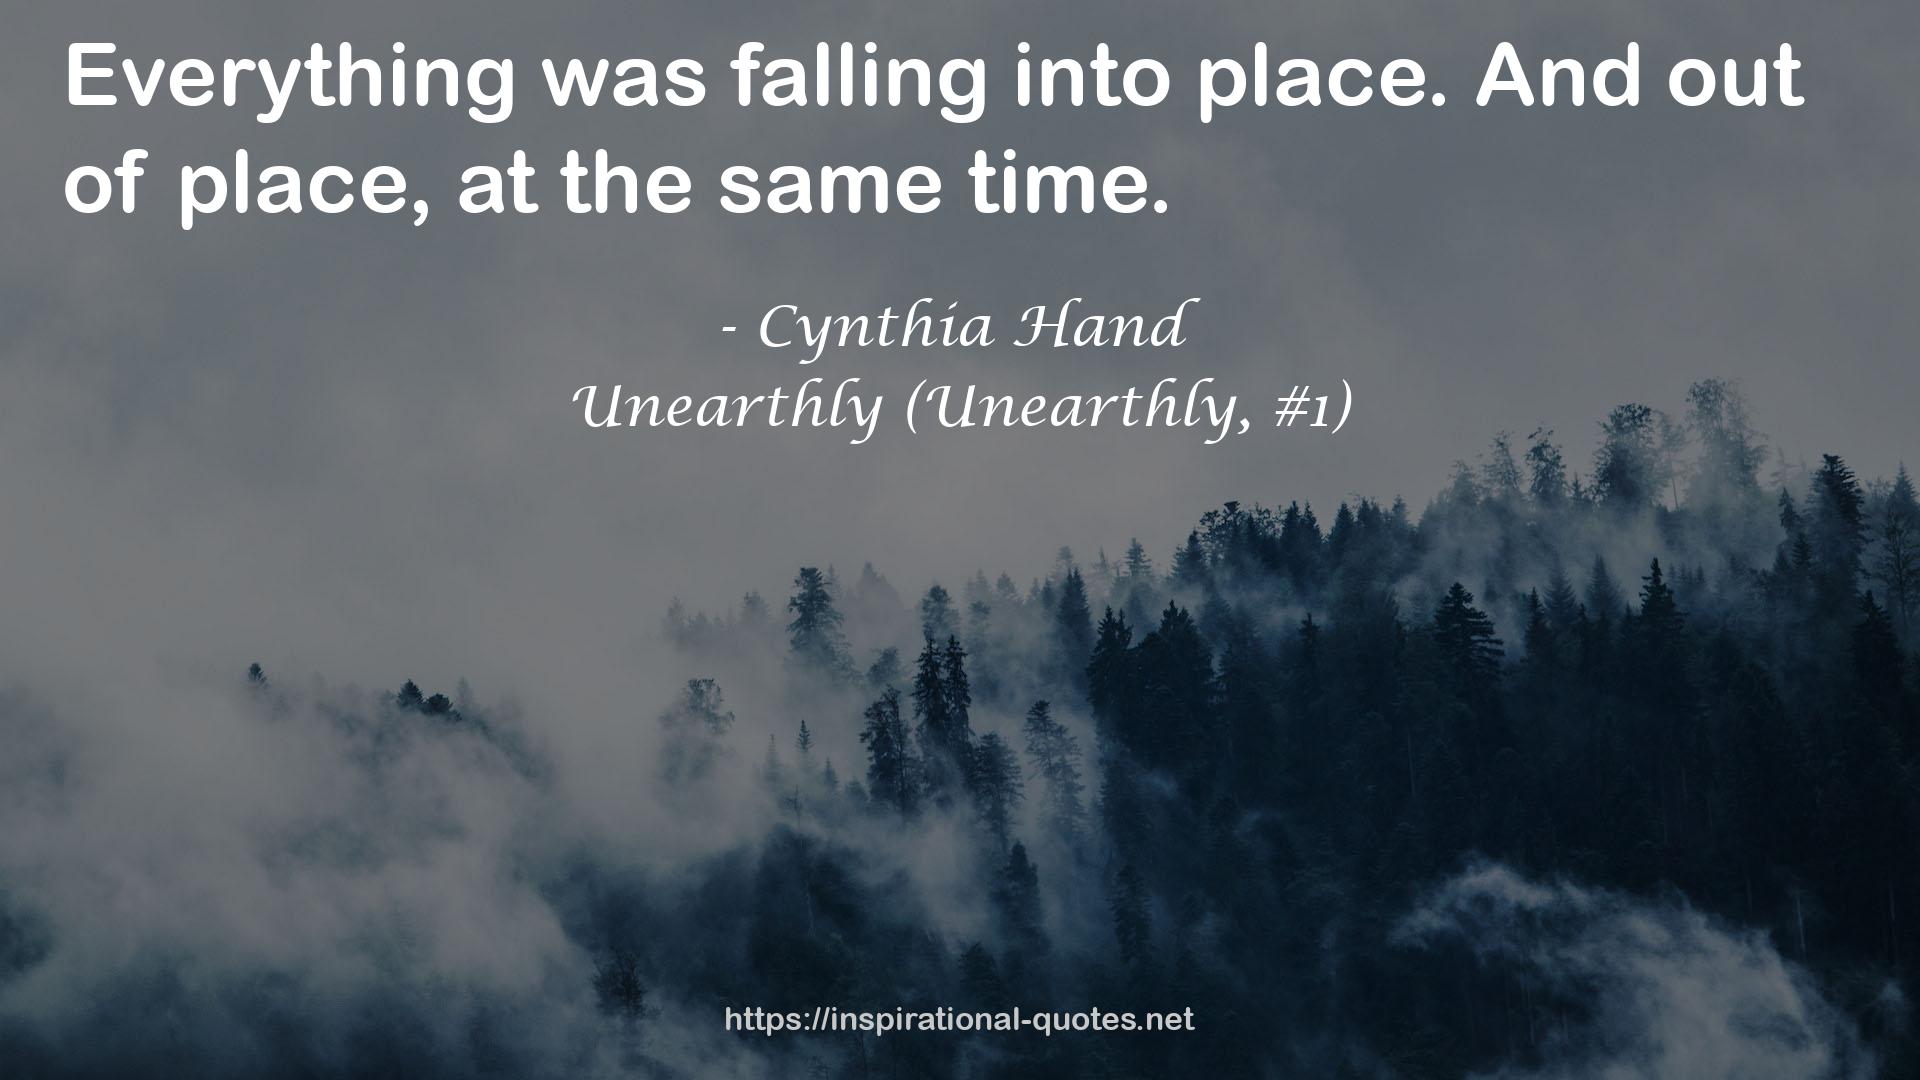 Unearthly (Unearthly, #1) QUOTES